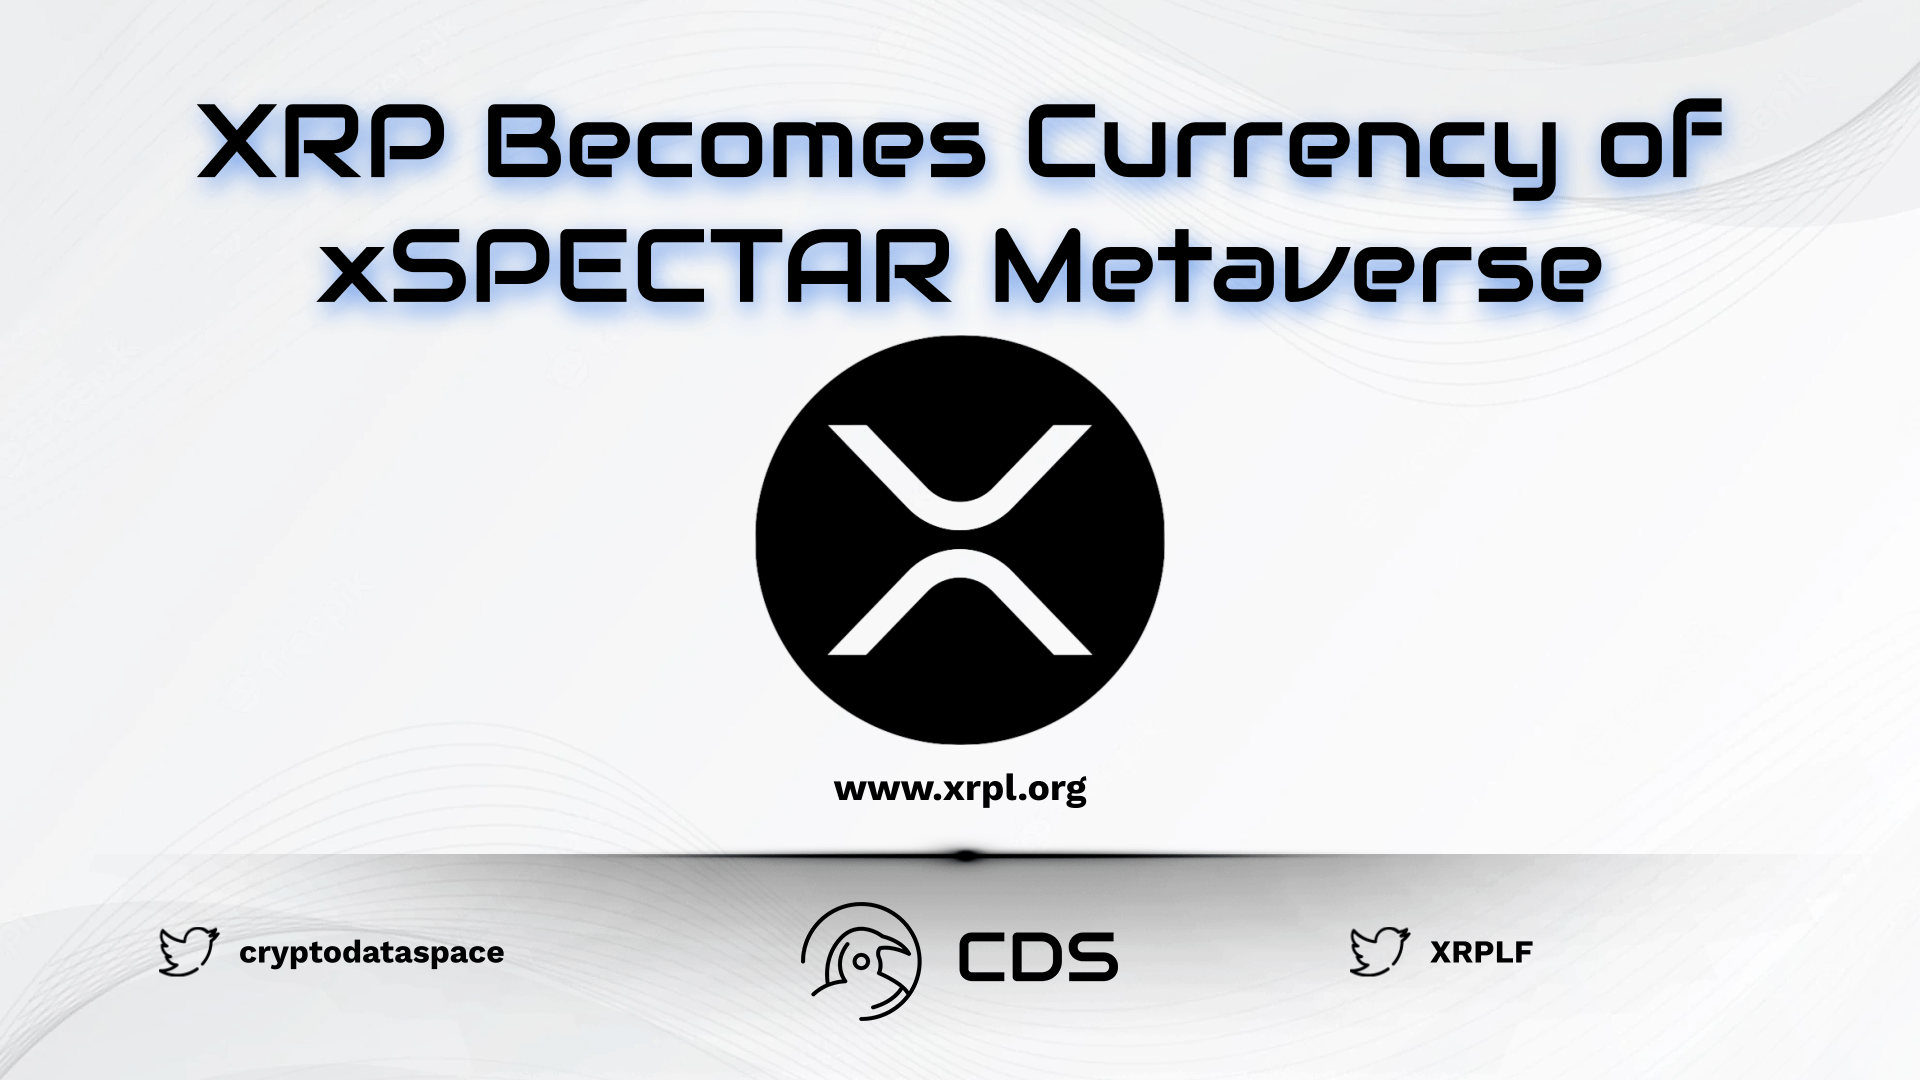 XRP Becomes Currency of xSPECTAR Metaverse